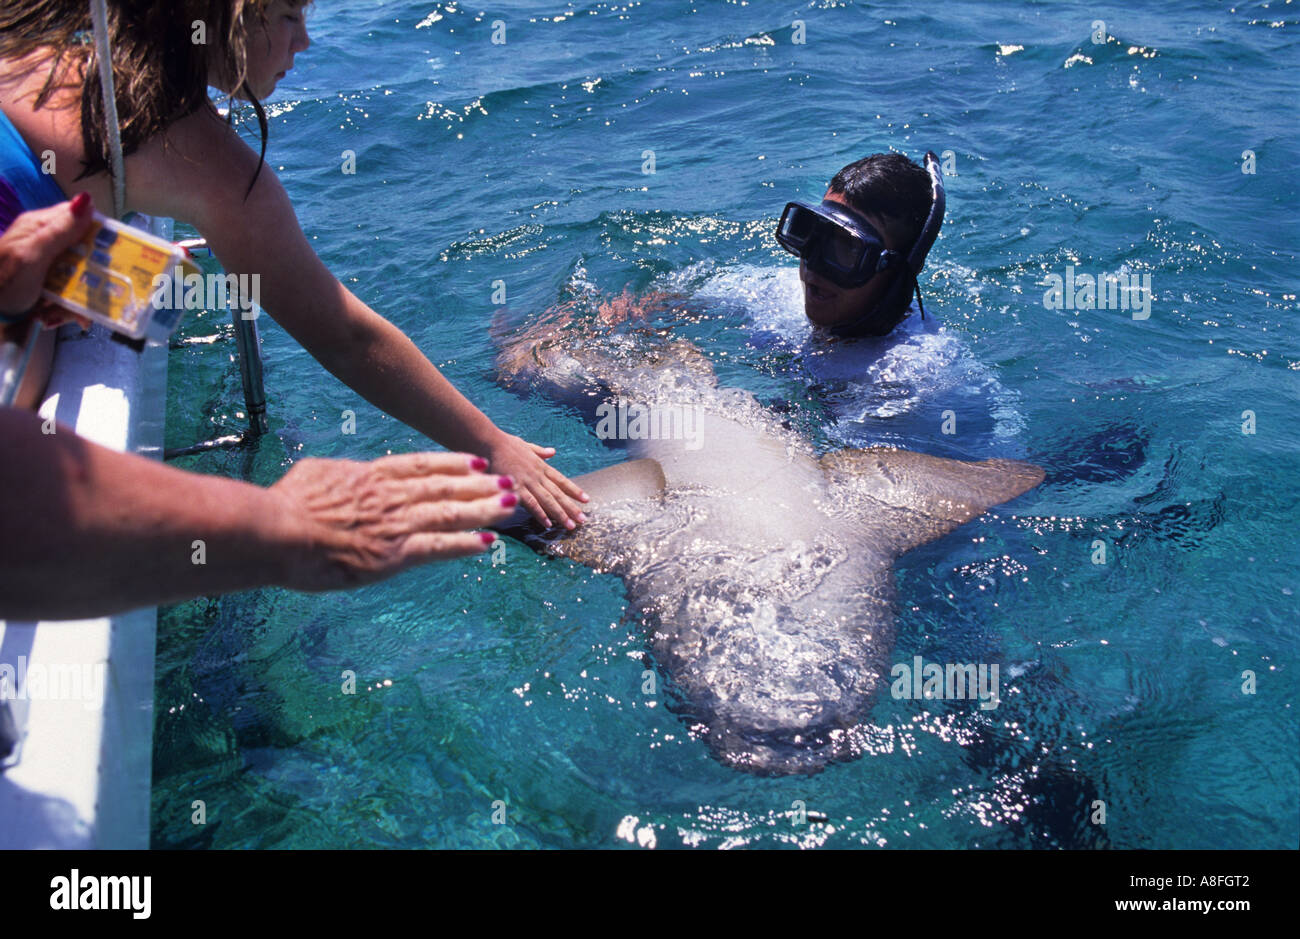 A DIVER INVITES TOURISTS TO STROKE A NURSE SHARK OFF AMBERGRIS CAYE BELIZE Stock Photo